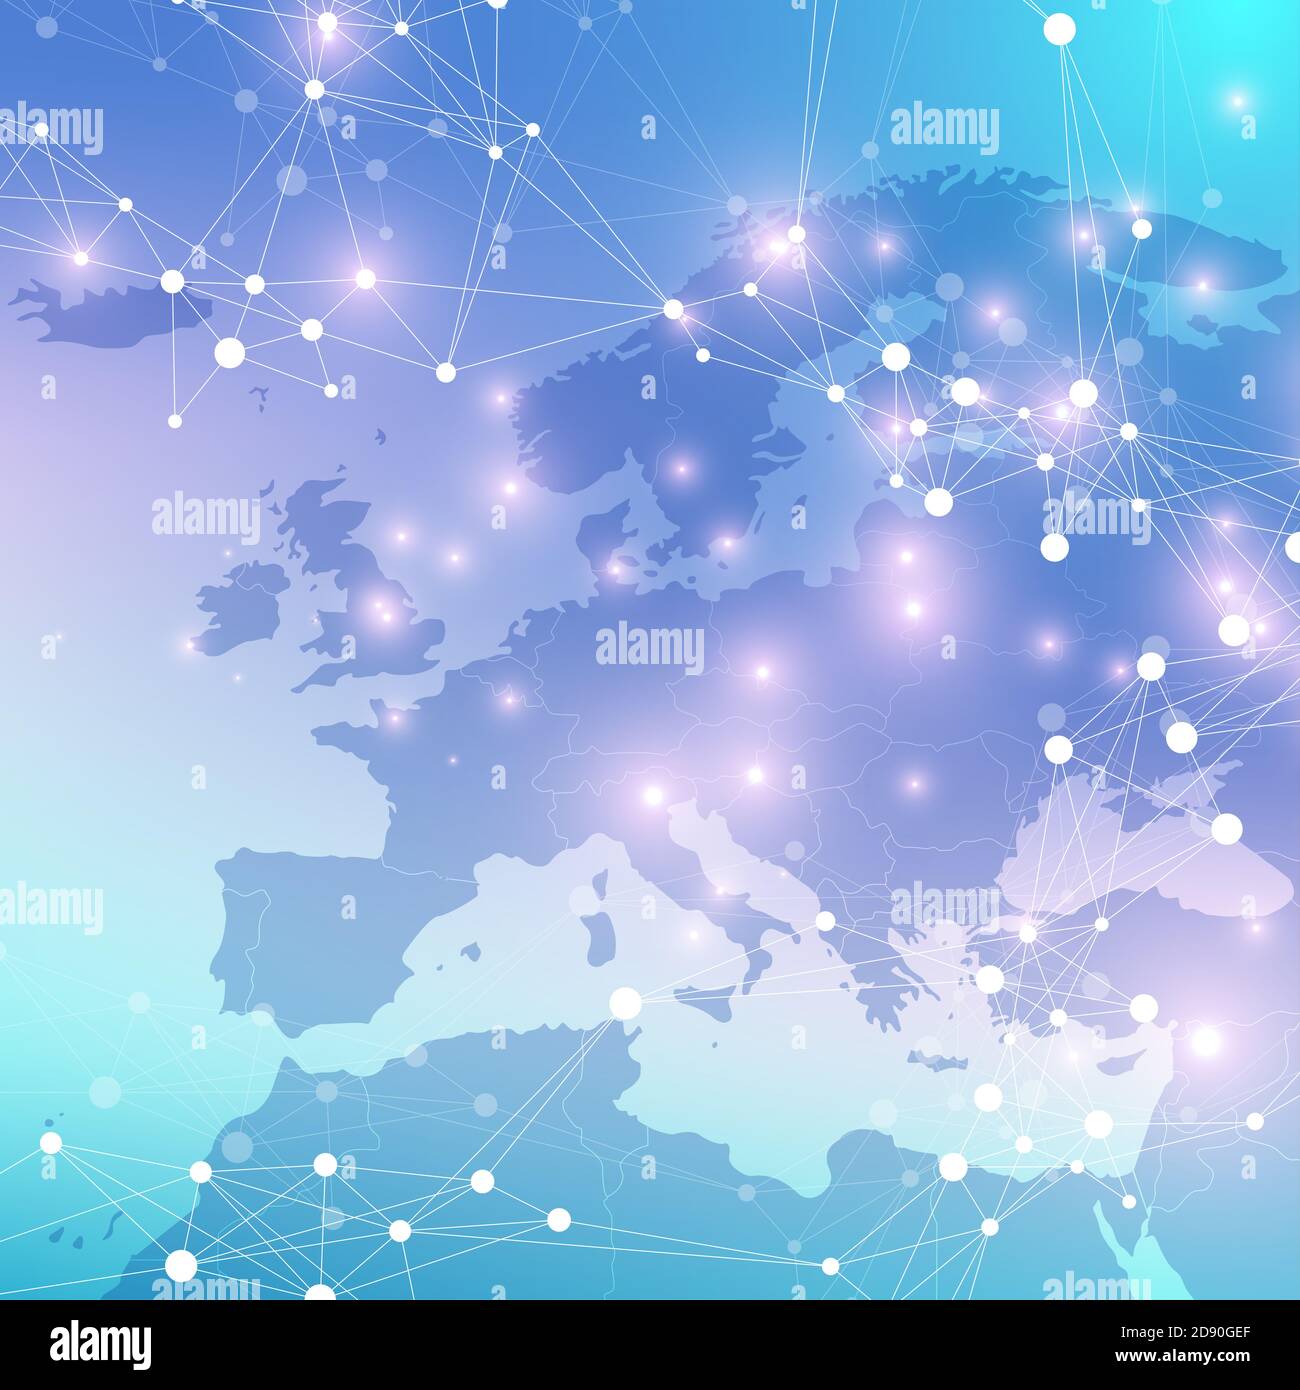 World map point with global technology networking concept. Digital data visualization. Lines plexus. Big Data background communication. Scientific Stock Photo